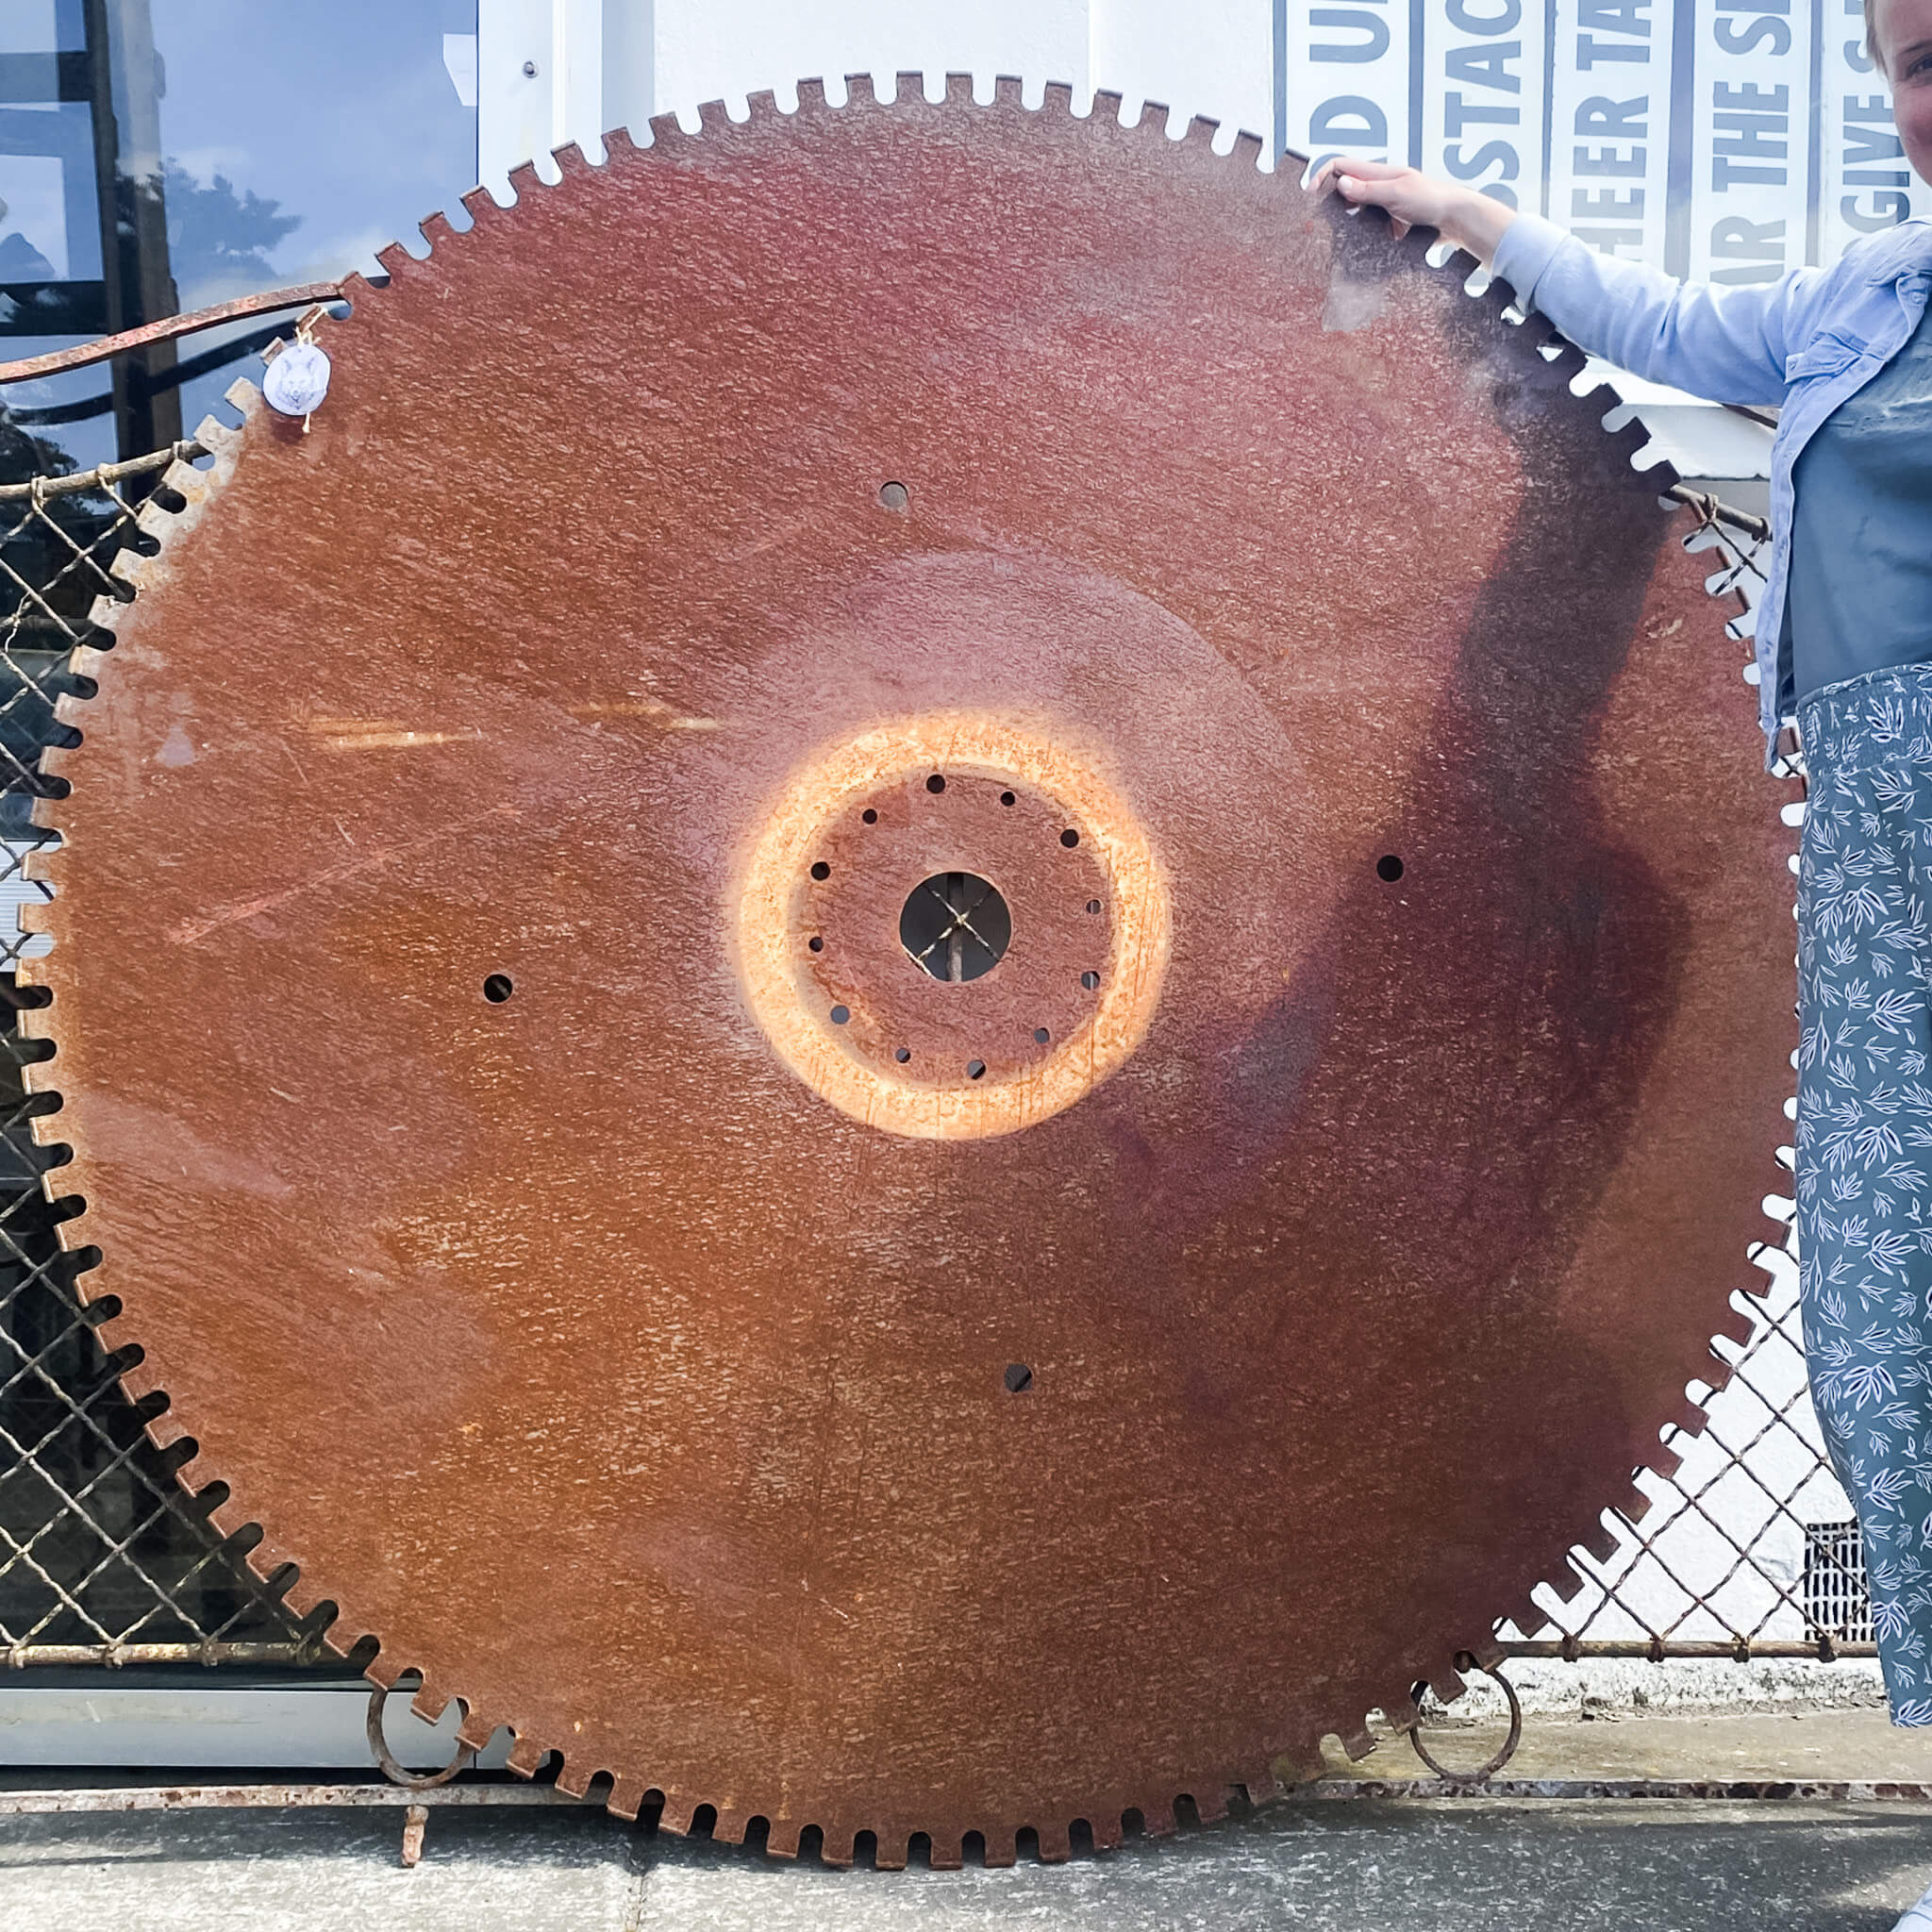 A Large Saw Blade